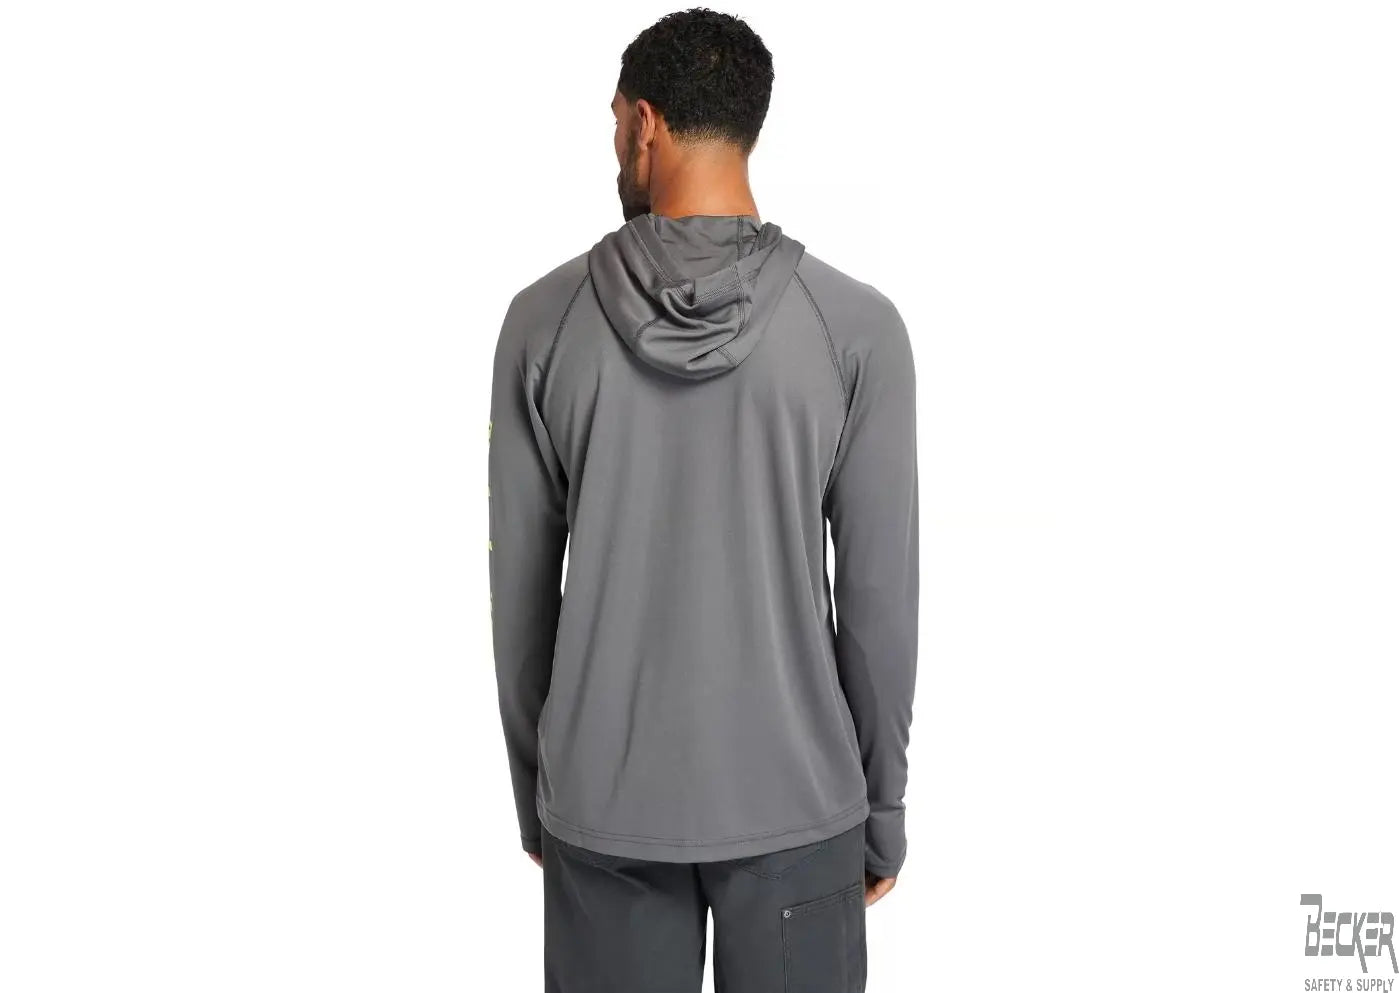 TIMBERLAND PRO - Wicking Good Hoodie, - Becker Safety and Supply